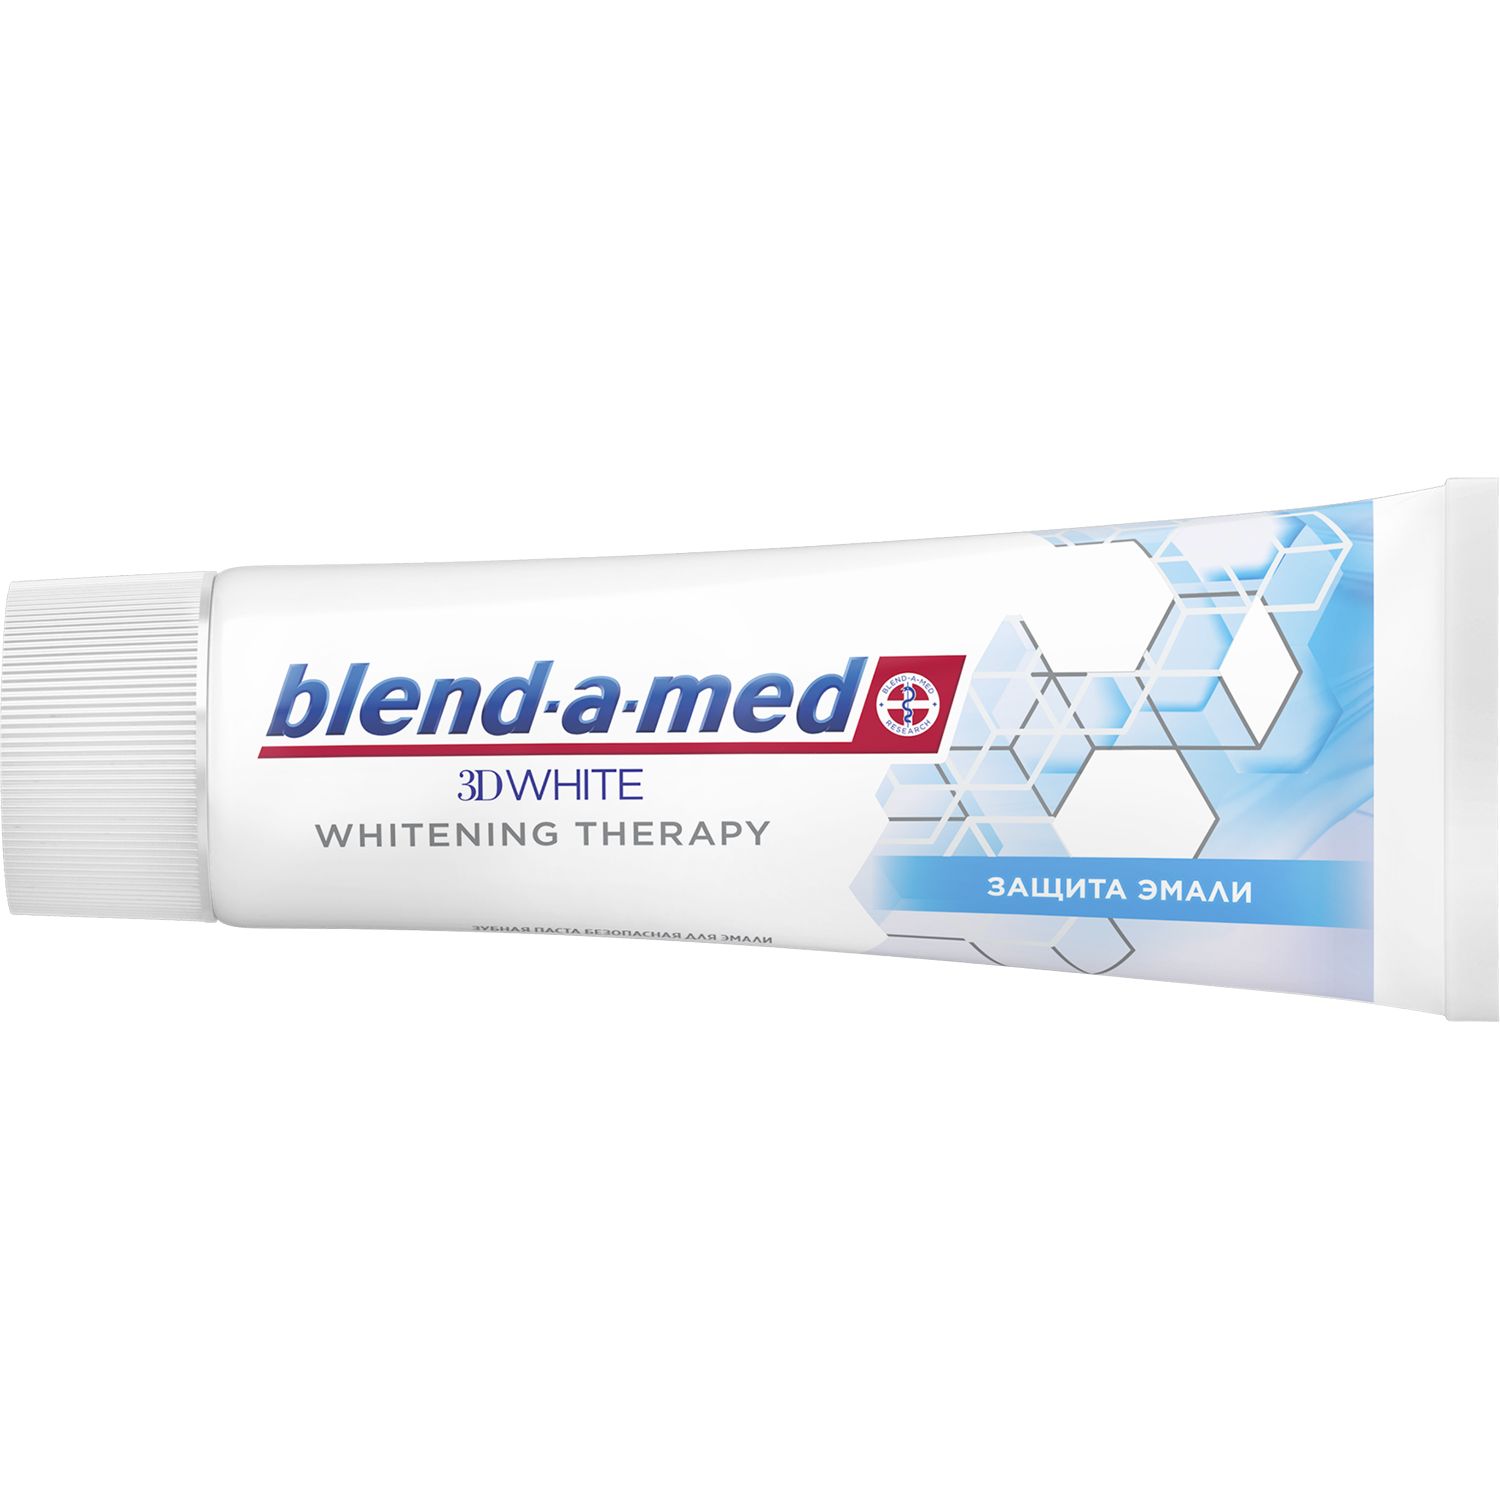 Зубна Паста Blend-a-med 3D White Whitening Therapy Захист зубної емалі 75 мл - фото 2